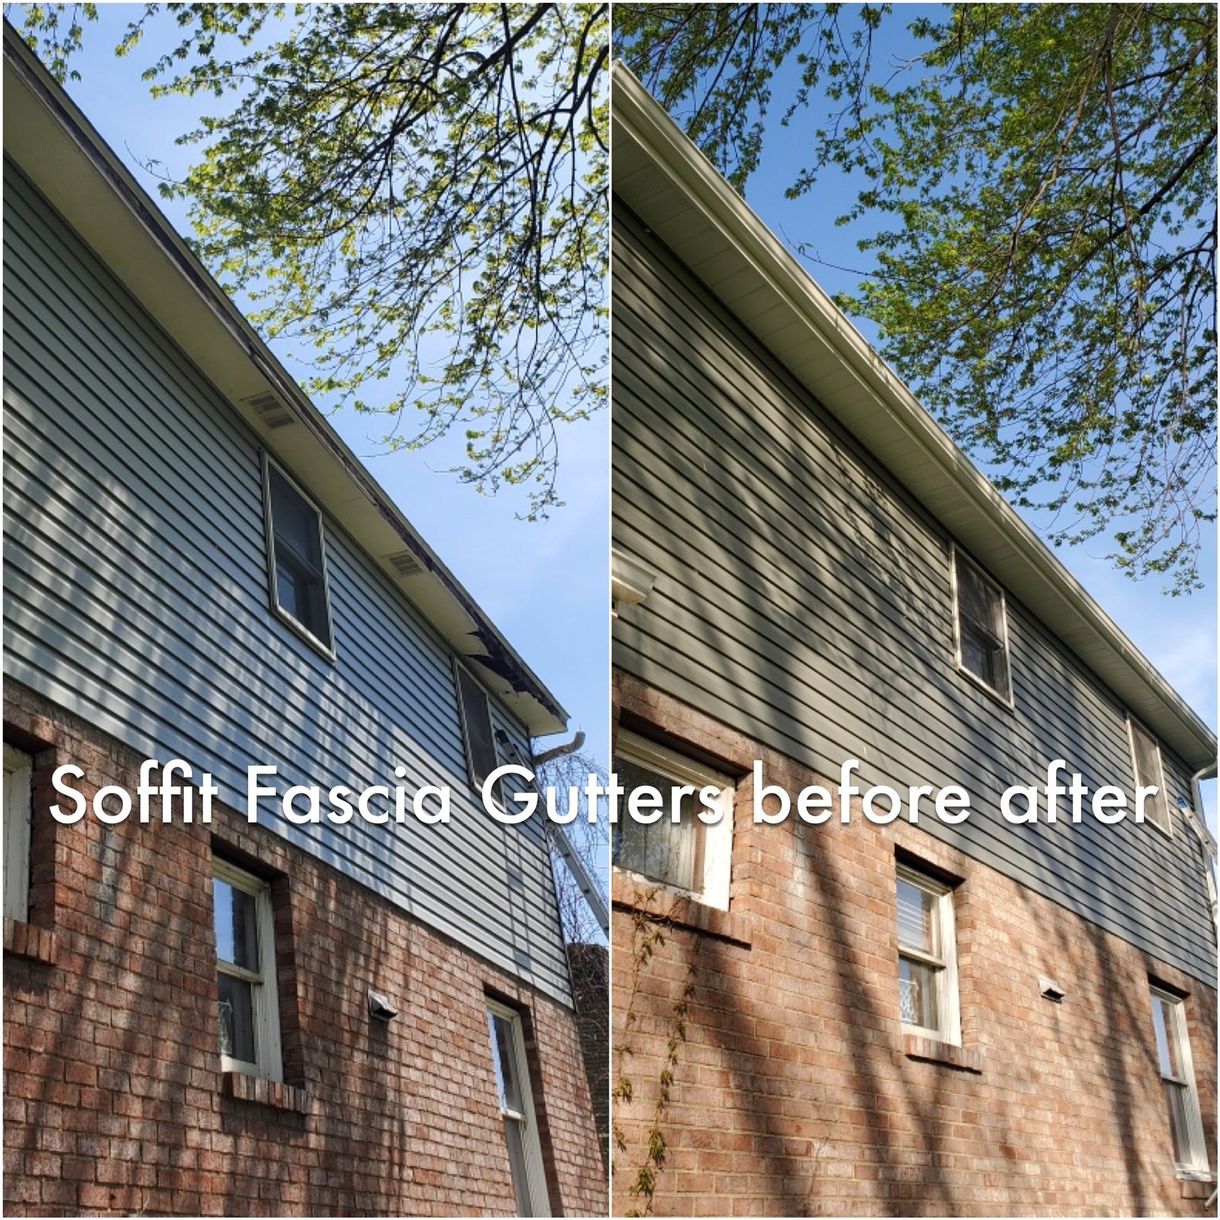 Soffit Facia Gutters - Seamless in Greensburg, PA